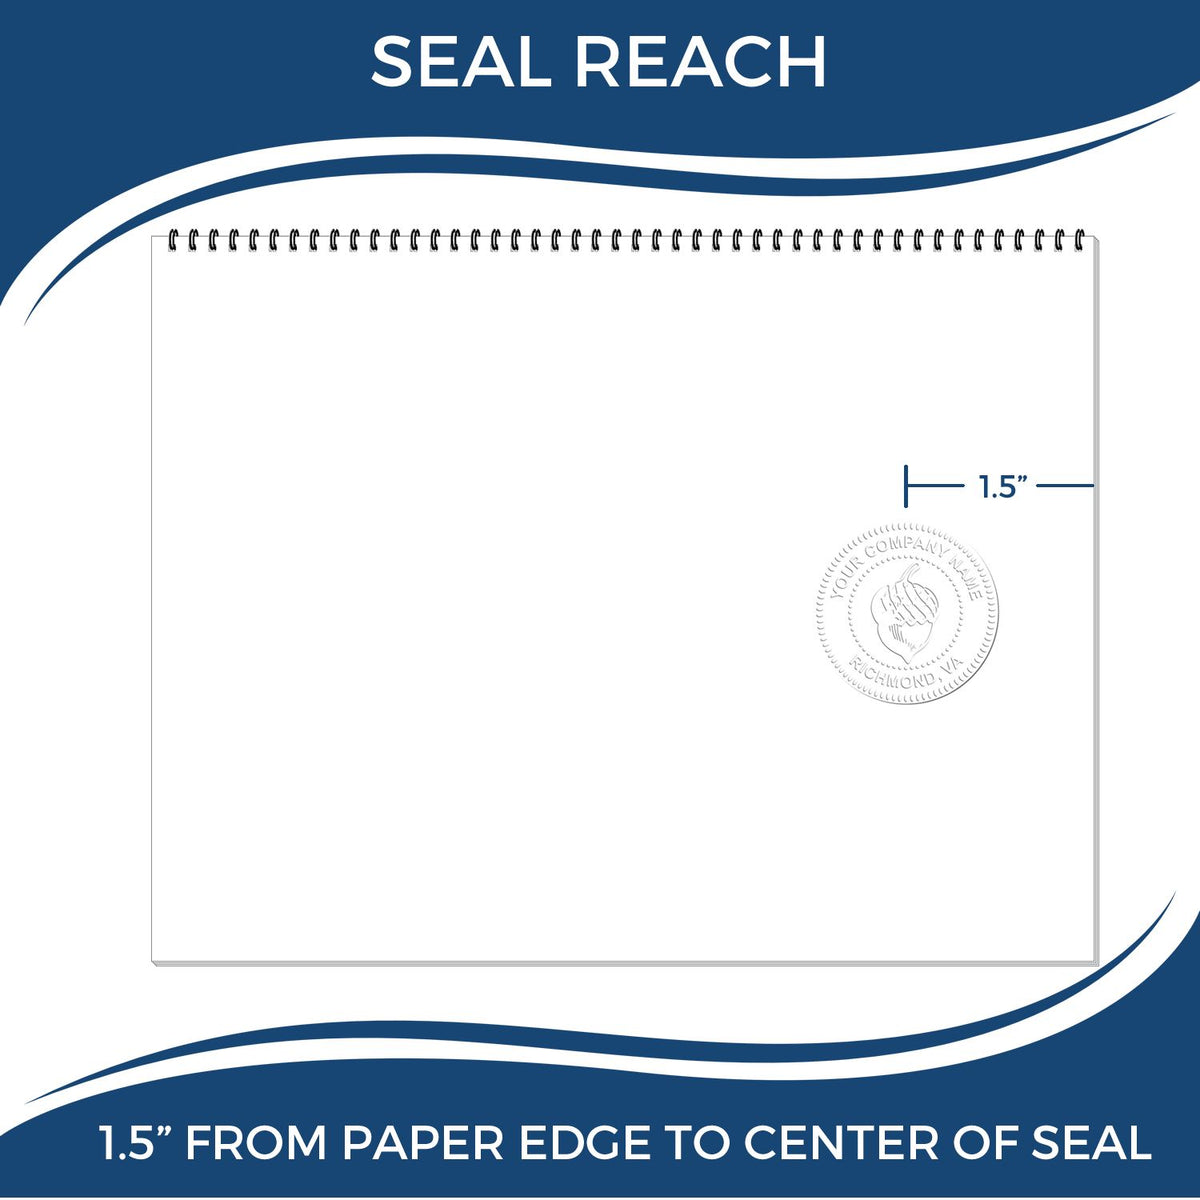 An infographic showing the seal reach which is represented by a ruler and a miniature seal image of the Handheld Virginia Professional Engineer Embosser